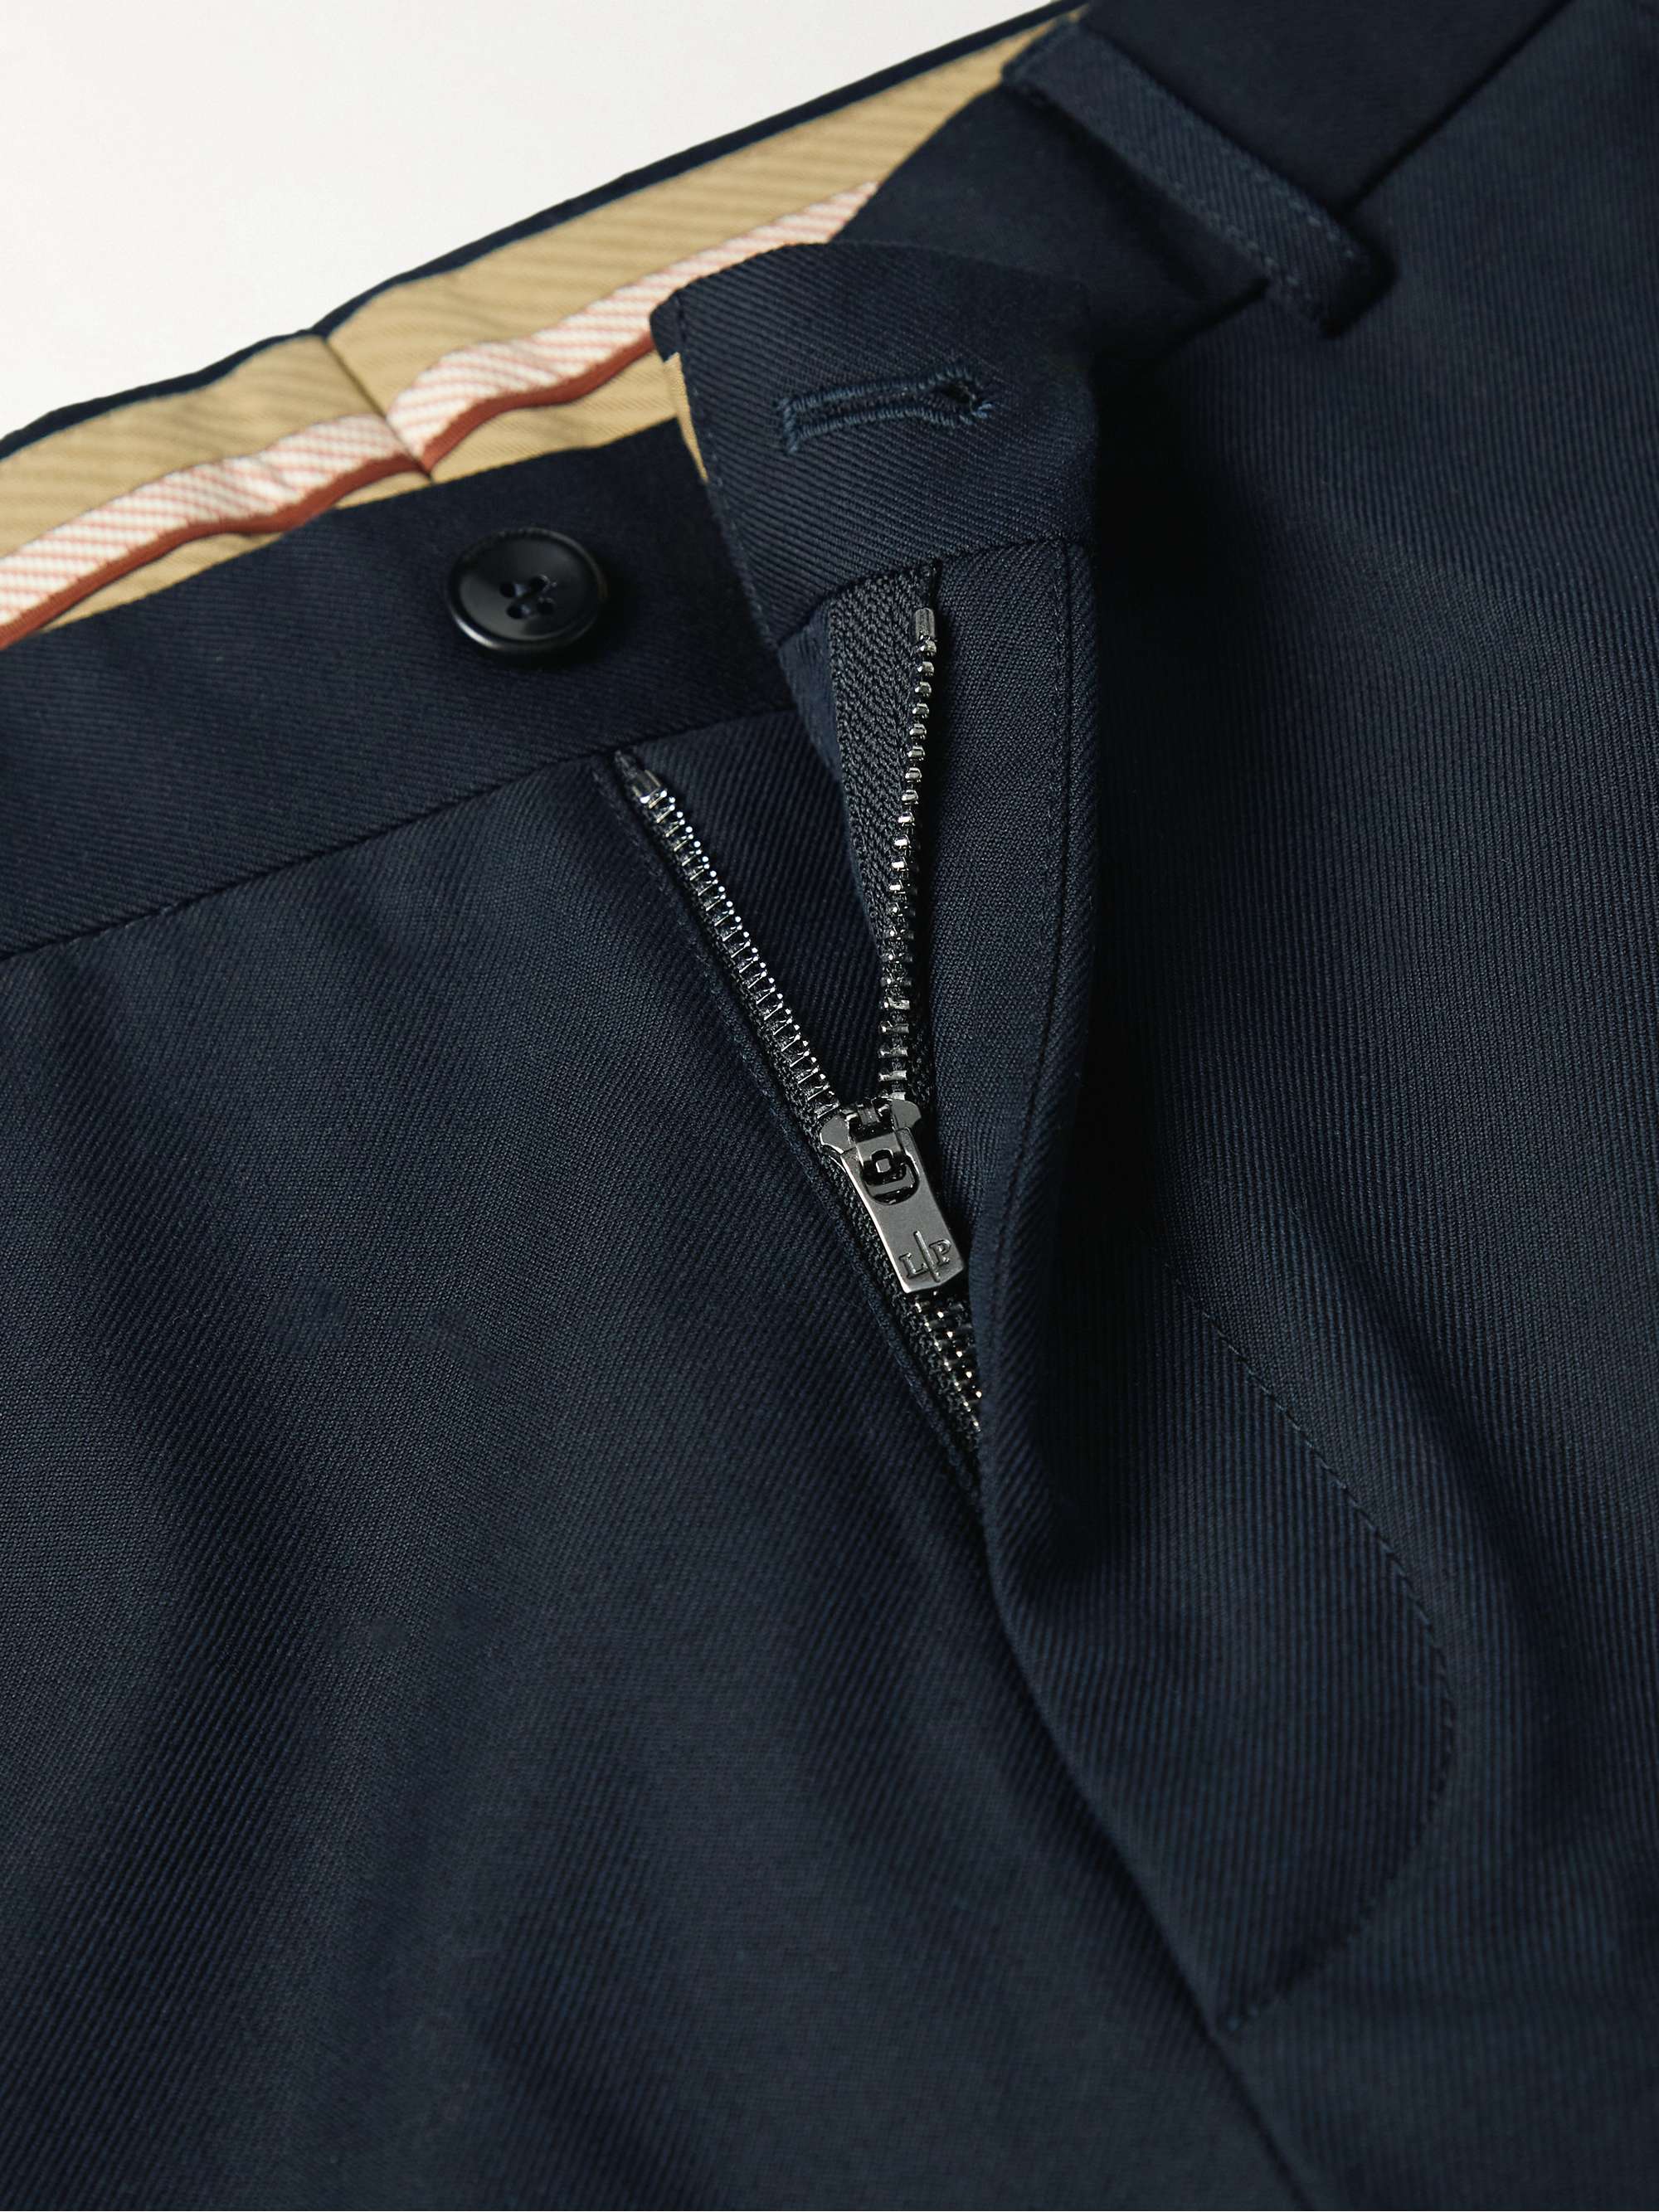 Navy Slim-Fit Cotton and Wool-Blend Twill Chinos | LORO PIANA | MR PORTER